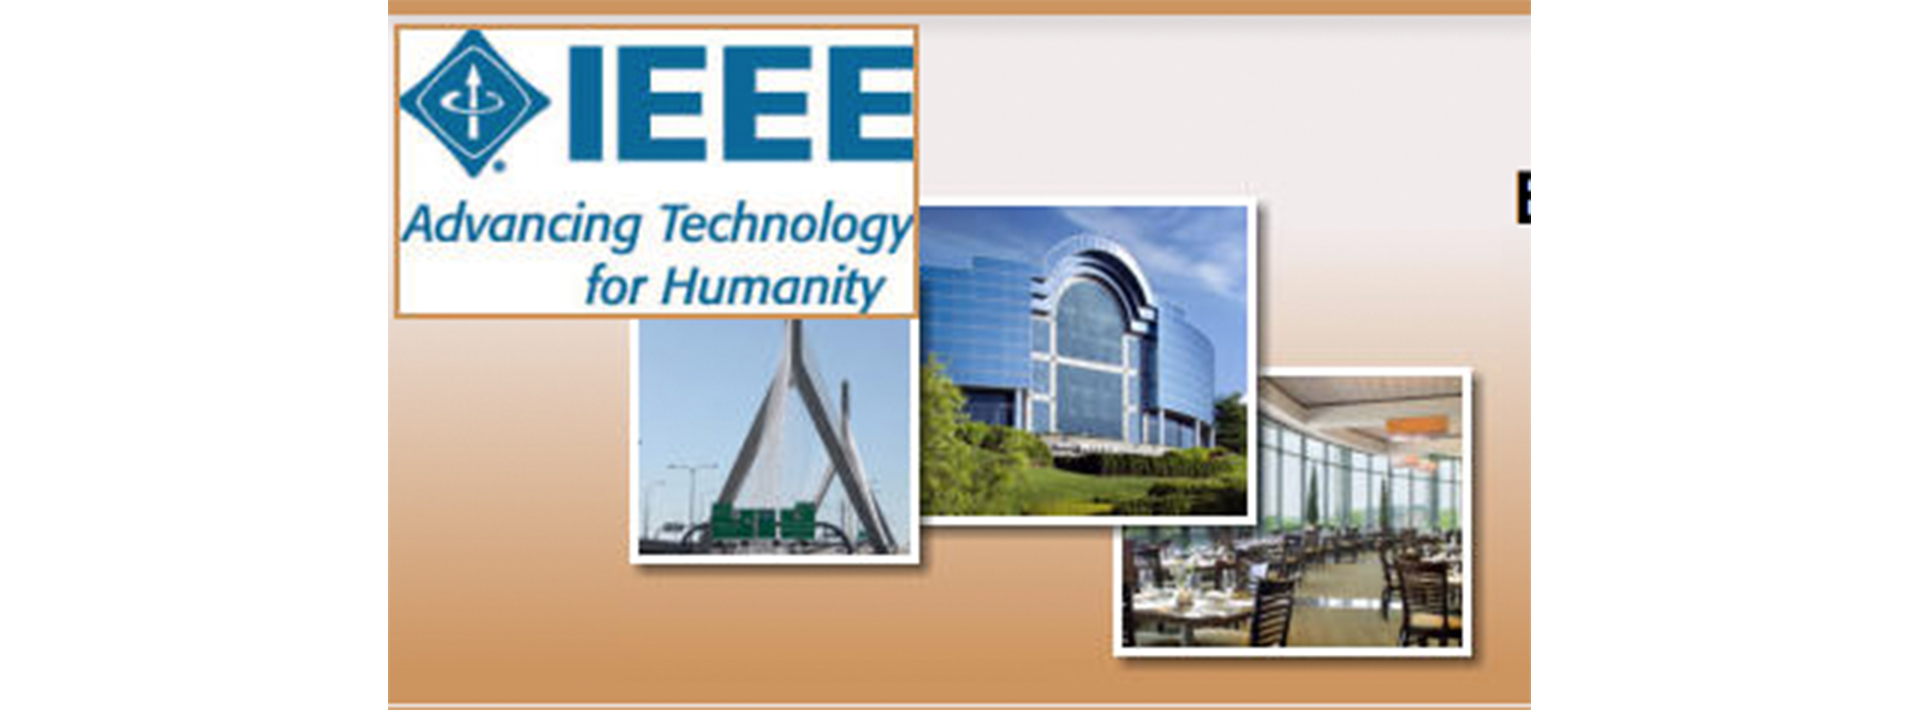 PhD student Mohamad Sindi’s paper selected as Best Paper Finalist for 2019 IEEE High Performance Extreme Computing Conference